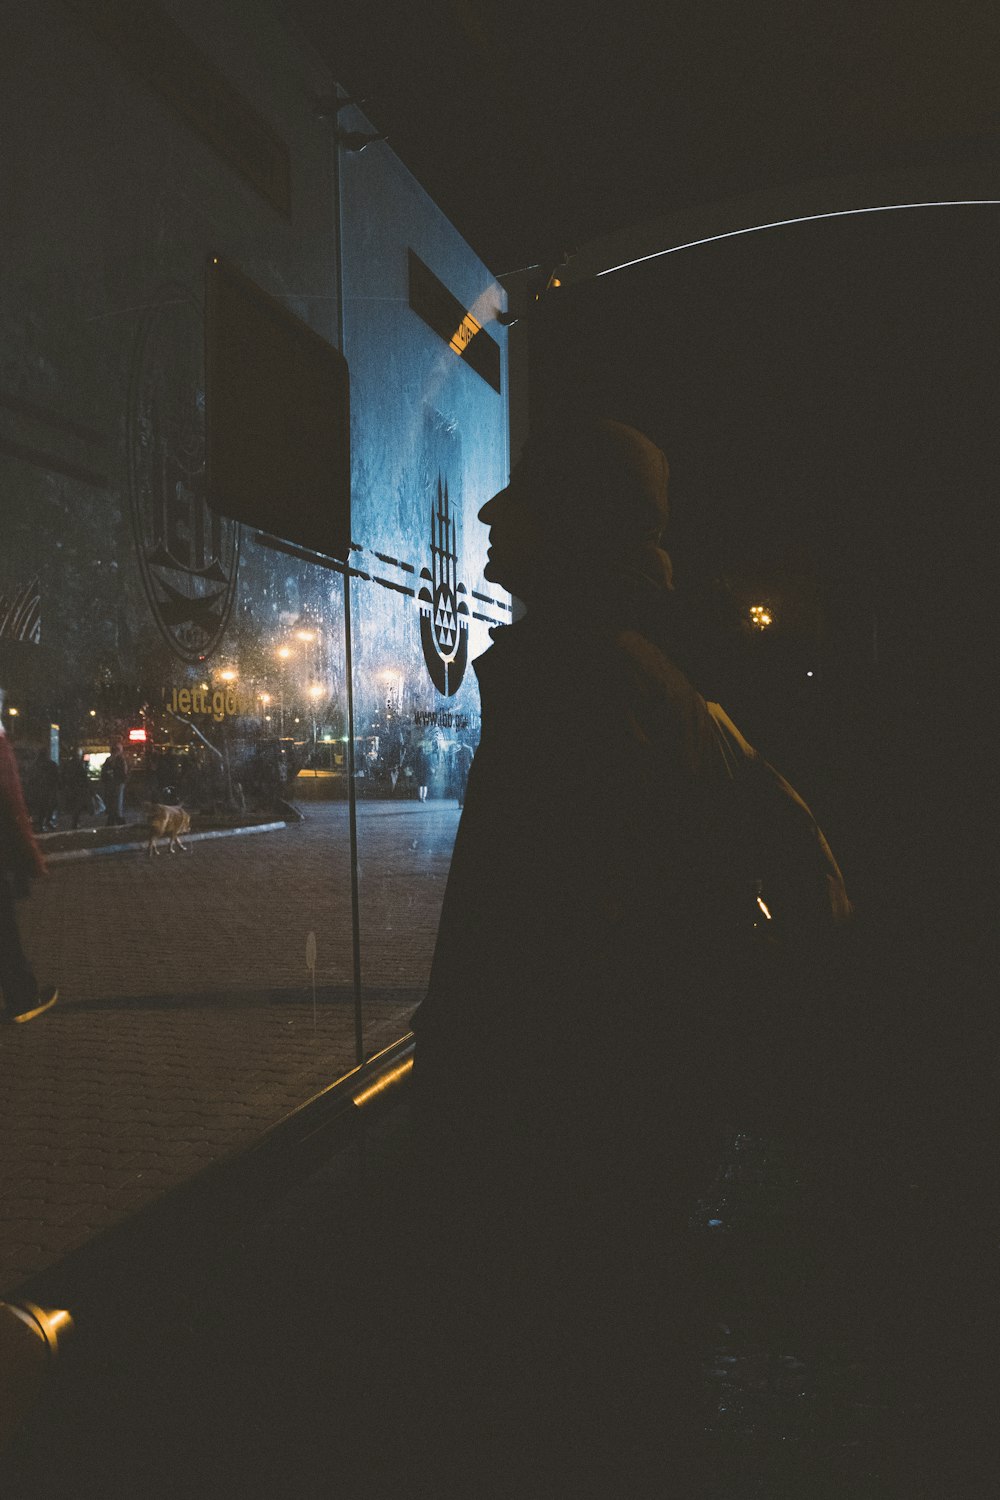 a man standing in front of a window at night